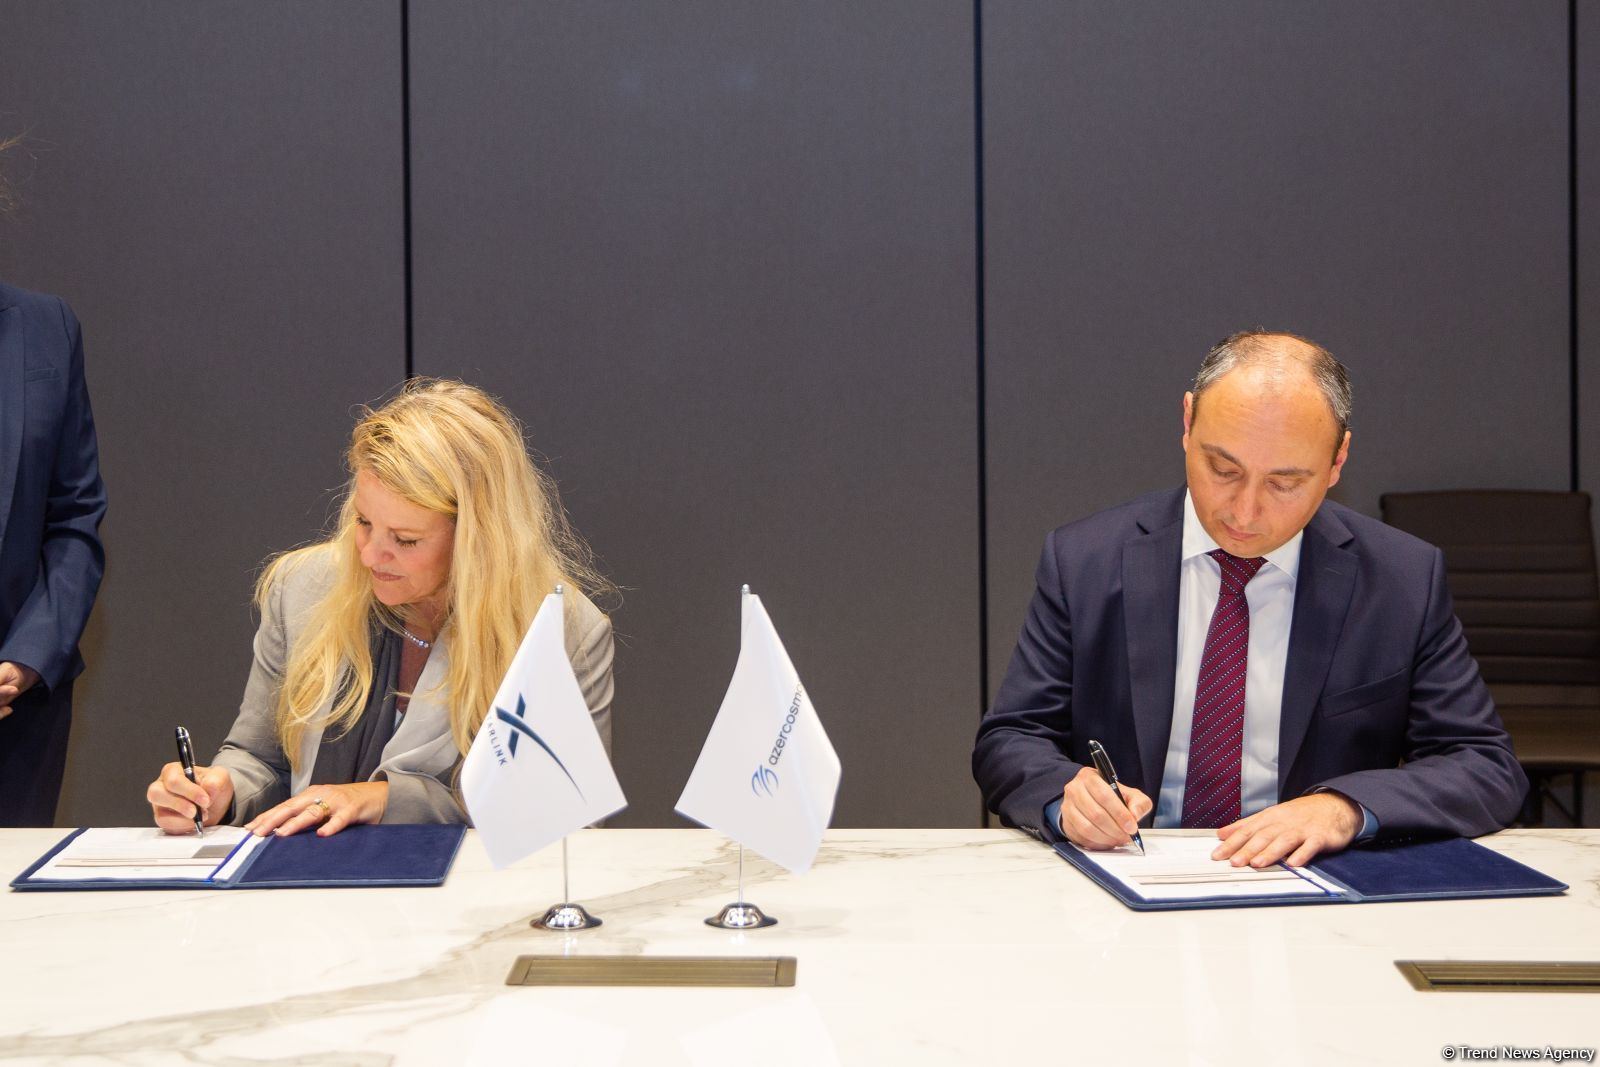 Azercosmos, SpaceX sign cooperation agreement